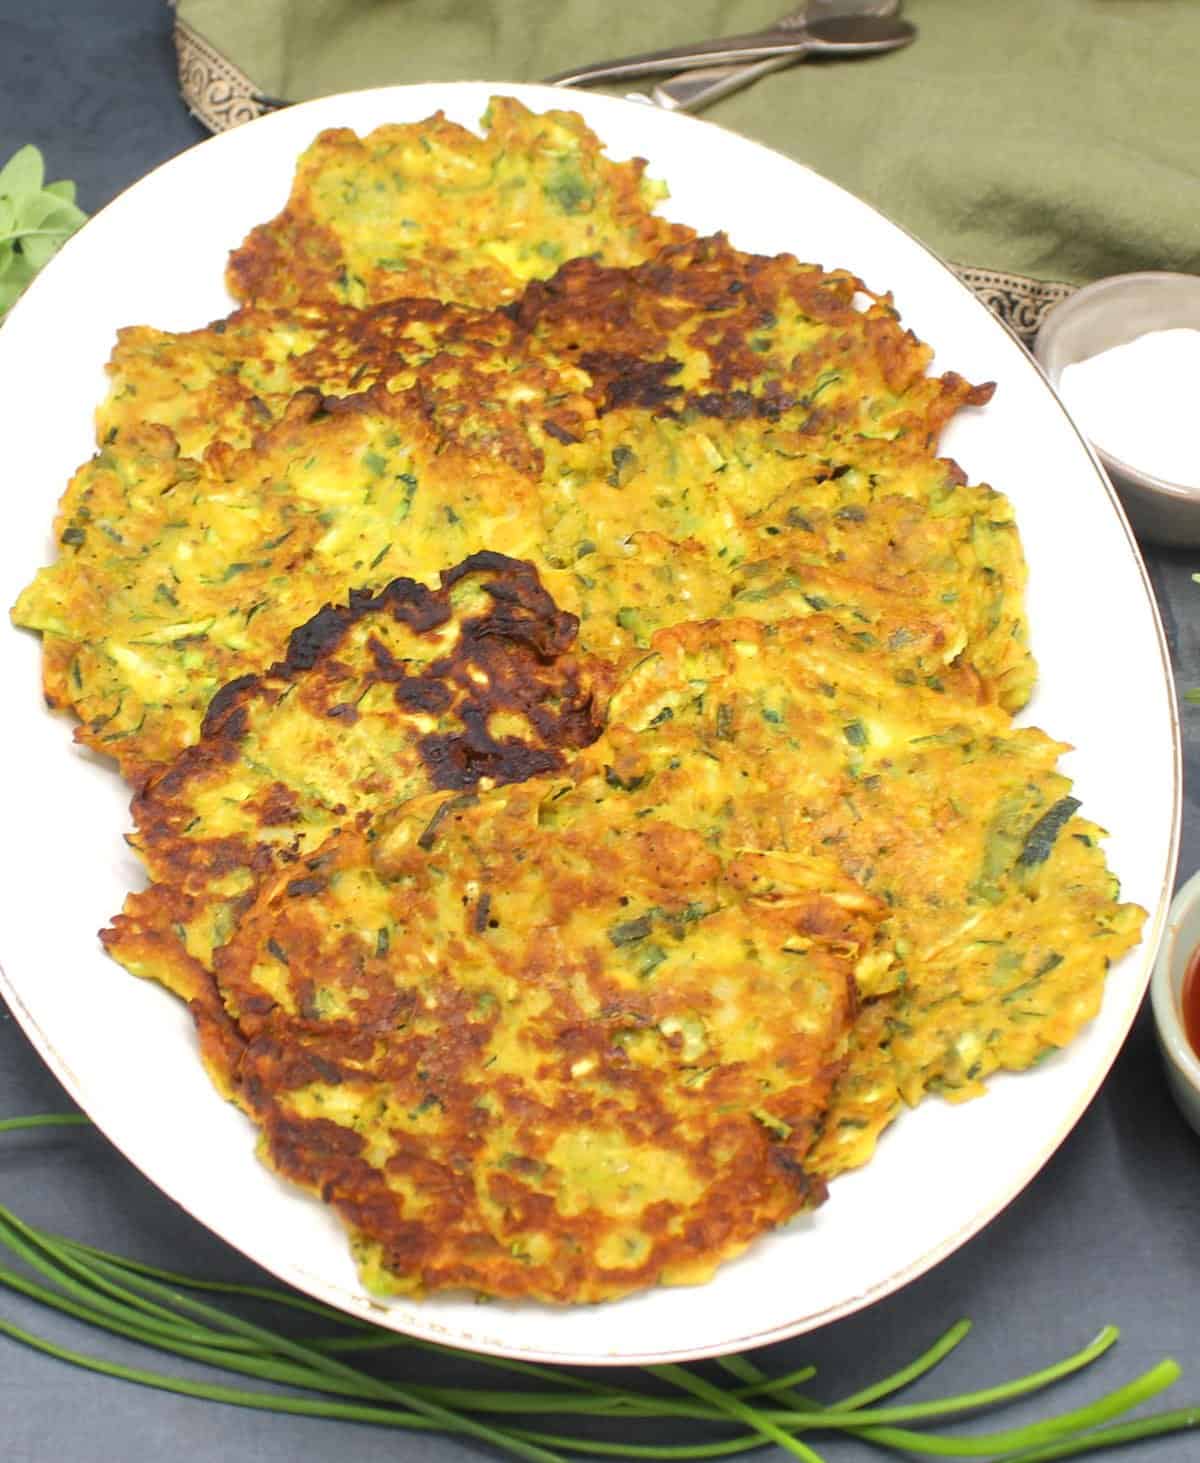 Vegan courgette fritters in white platter with herbs and sauces surrounding it.